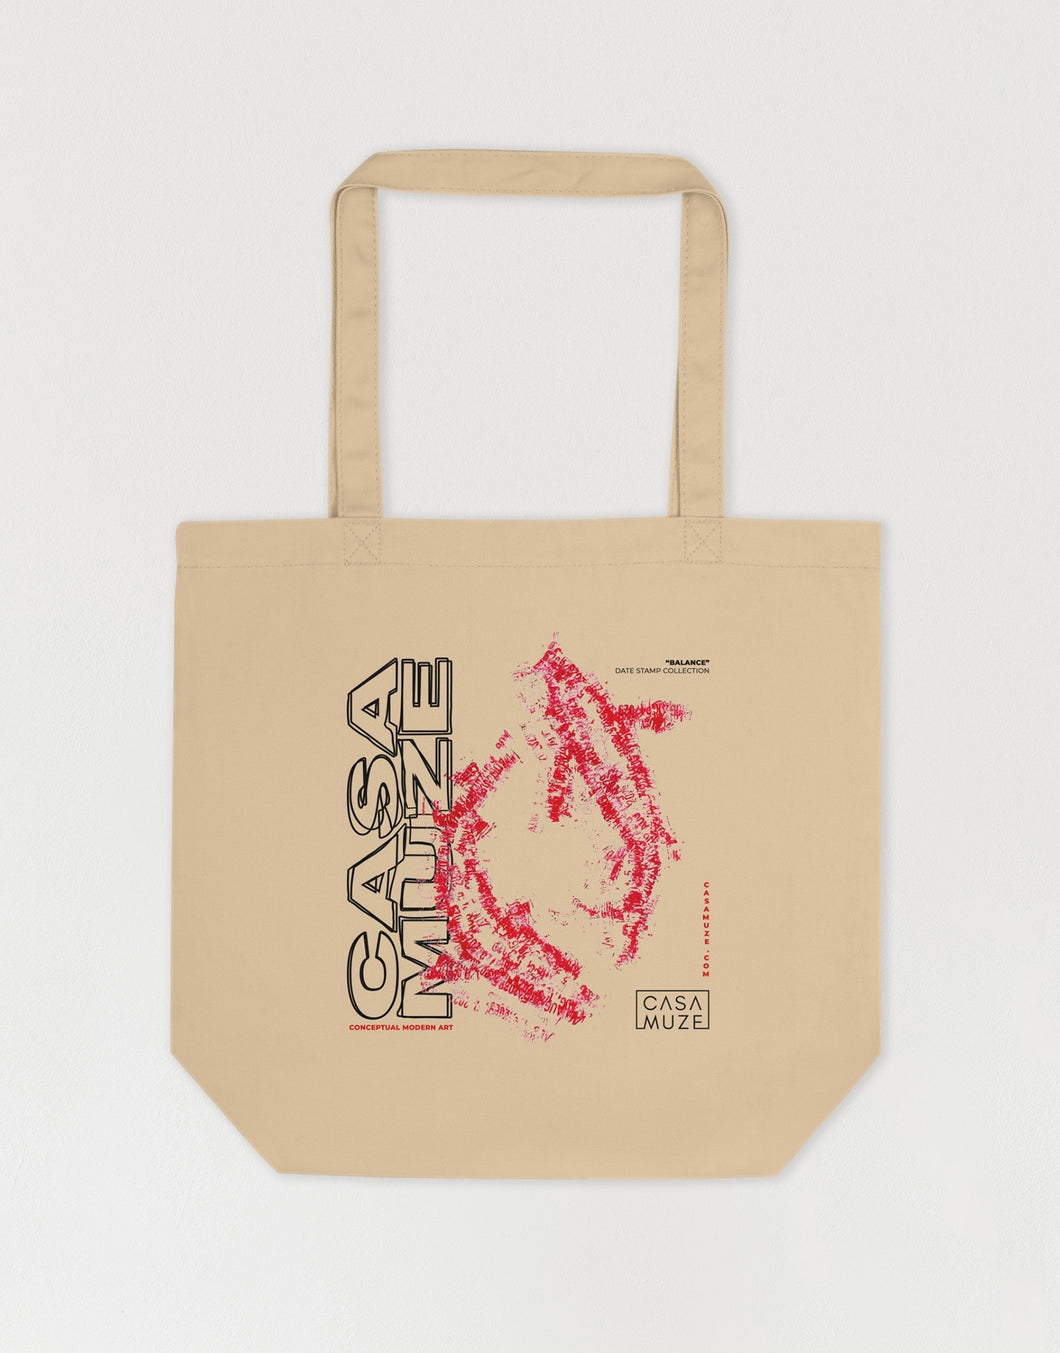 Artistic canvas tote bag featuring two abstract stamped koi fish